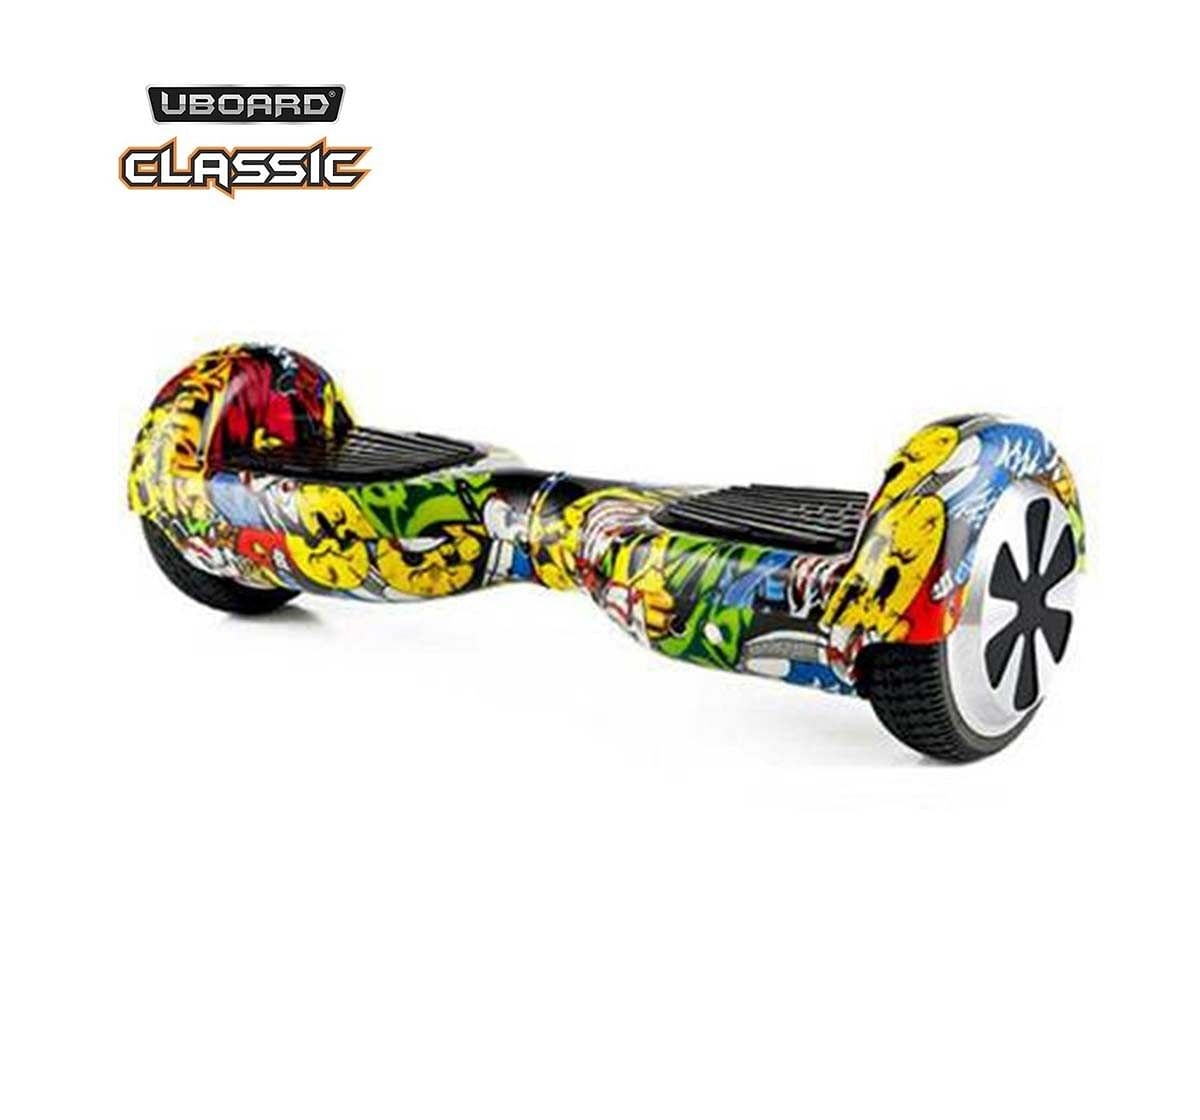 Uboard Hoverboard Classic 6.5 Lite Ev Novelty Rideons for Kids age 14Y+ 